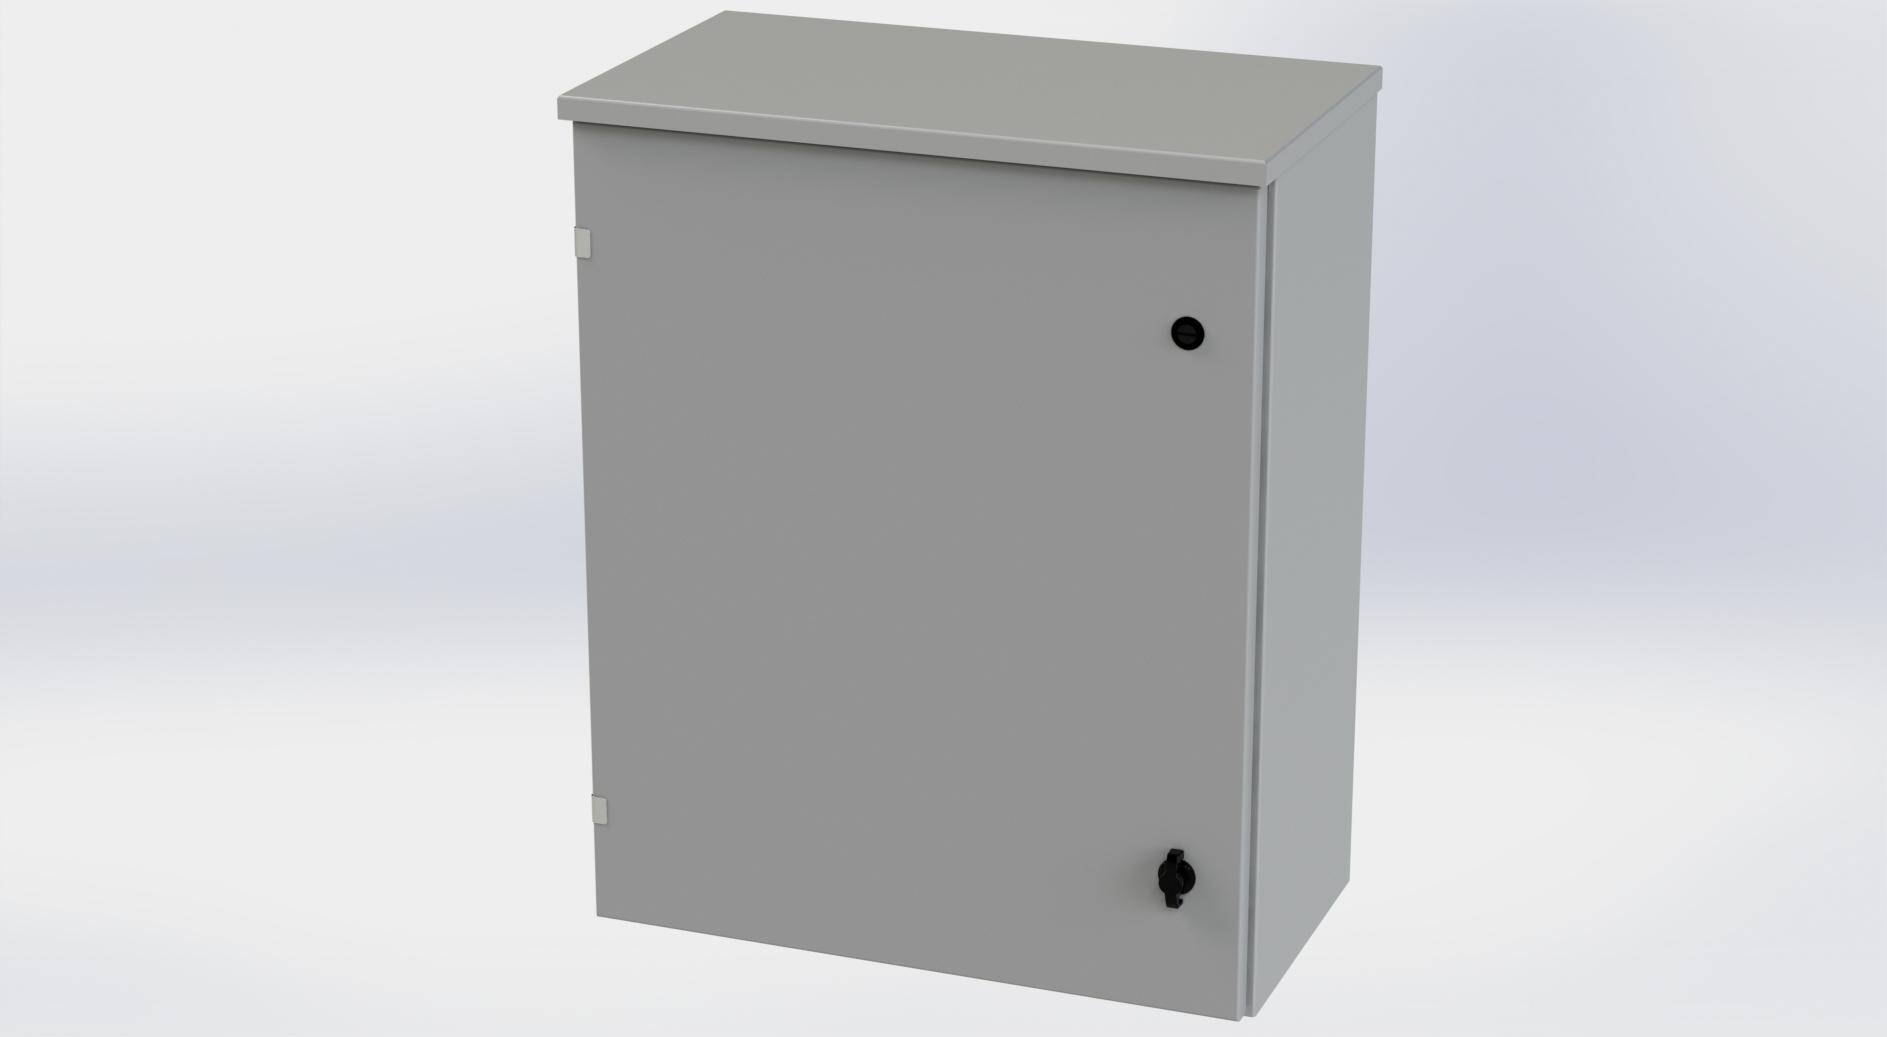 Saginaw Control SCE-30R2412LP Type-3R Hinged Cover Enclosure, Height:30.00", Width:24.00", Depth:12.00", ANSI-61 gray powder coating inside and out. Optional sub-panels are powder coated white.